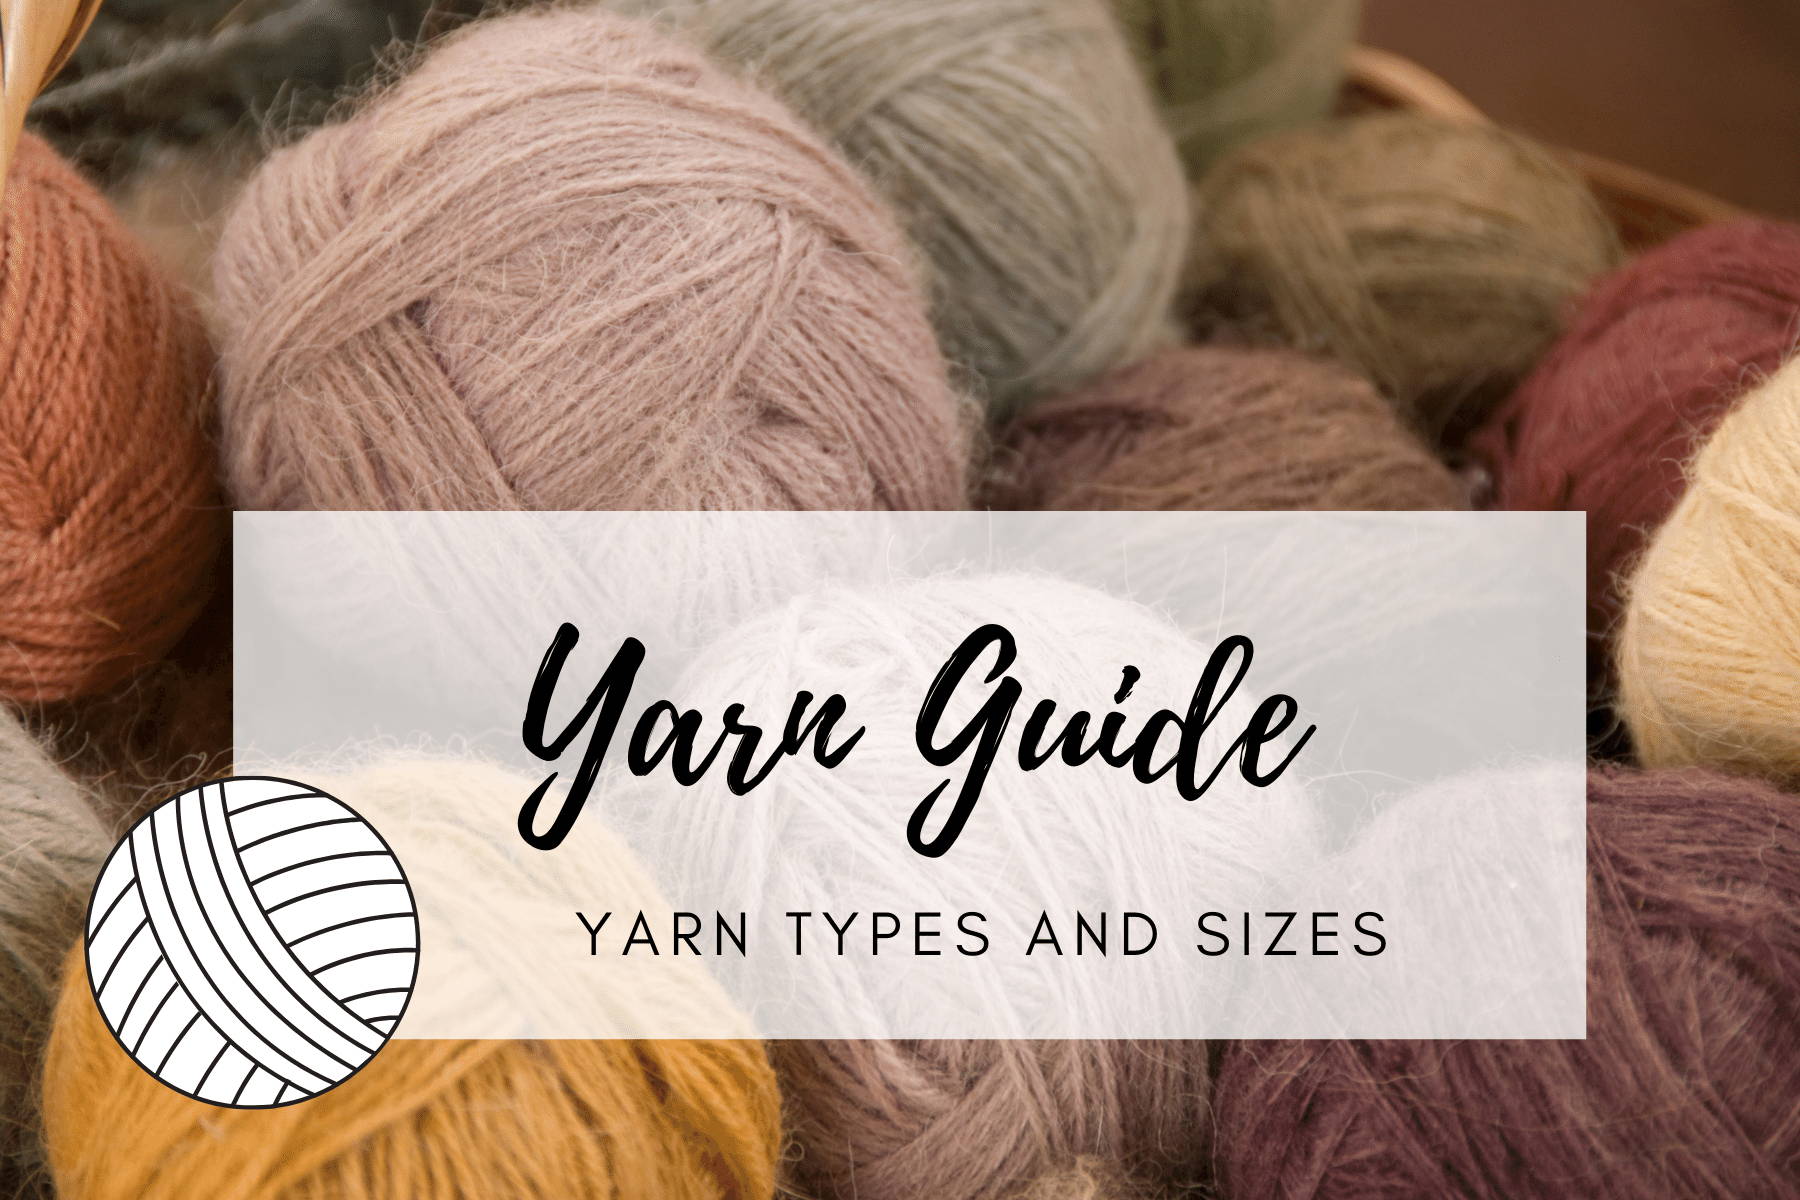 5 Types of Yarn Ball & How to Work with Them